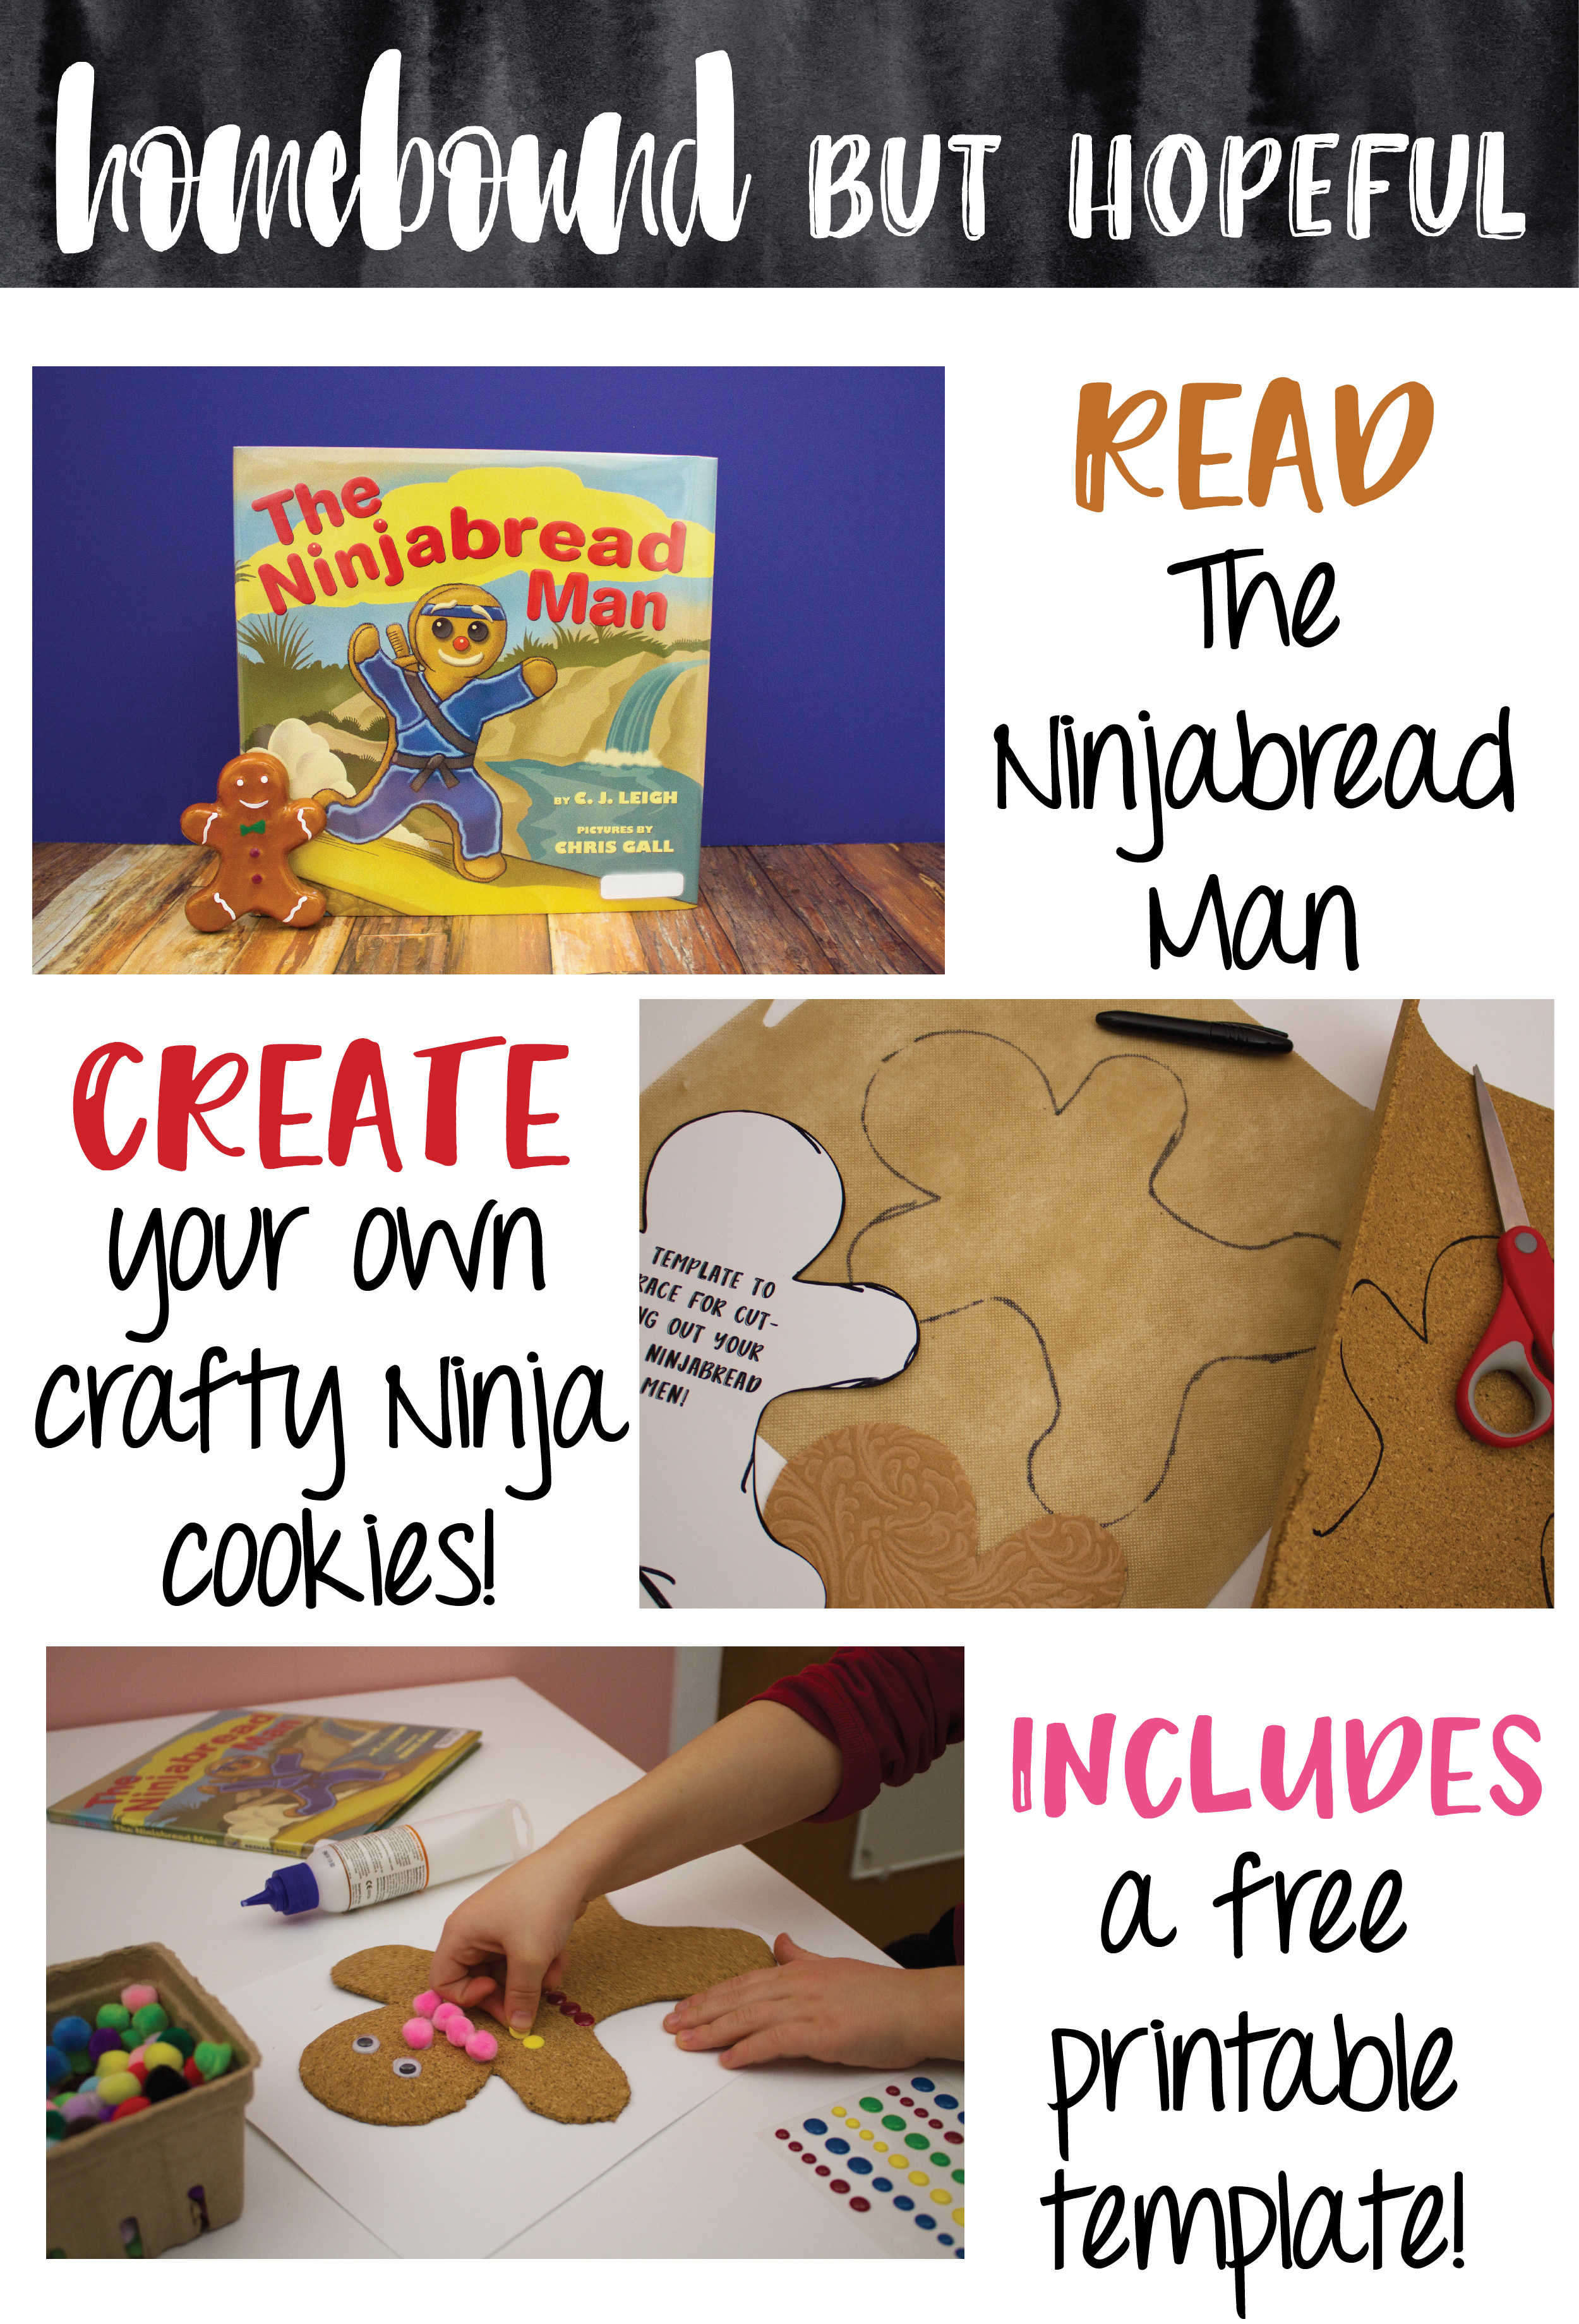 A great alternative to baking this holiday season, with a fun ninja twist! Check out the book "The Ninjabread Man" and use my free printable template to help your kids craft their very own ninjabread men 'cookies'!